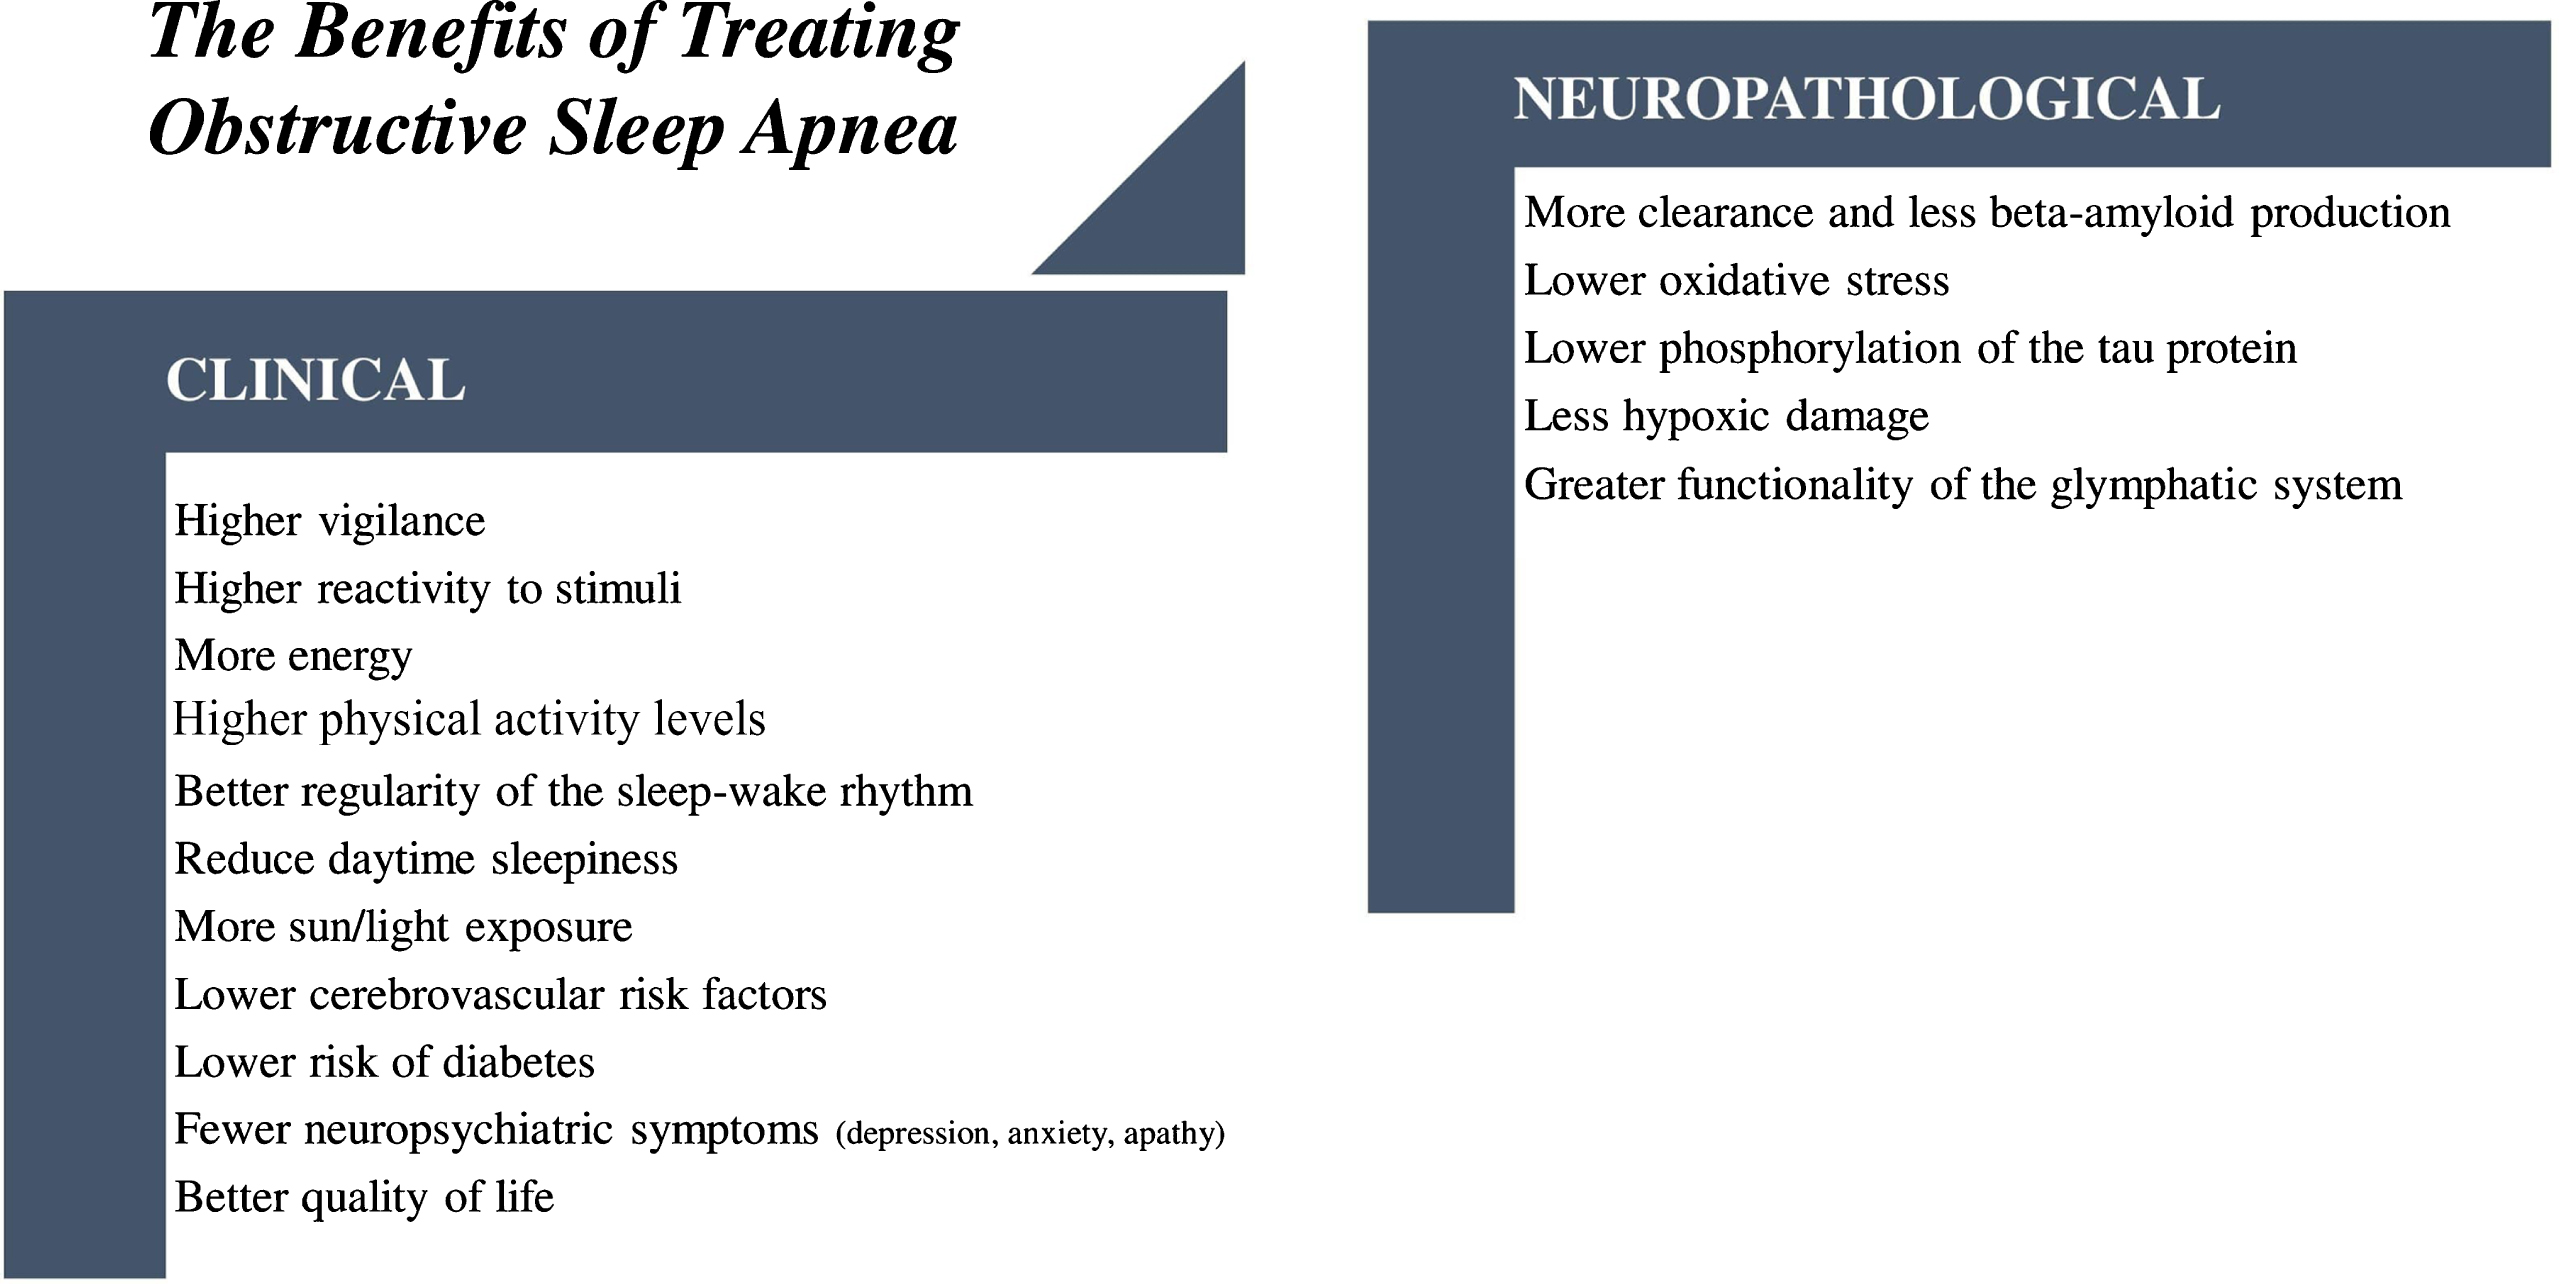 Benefits of treating OSA in clinical and neuropathological aspects in patients with MCI and AD.